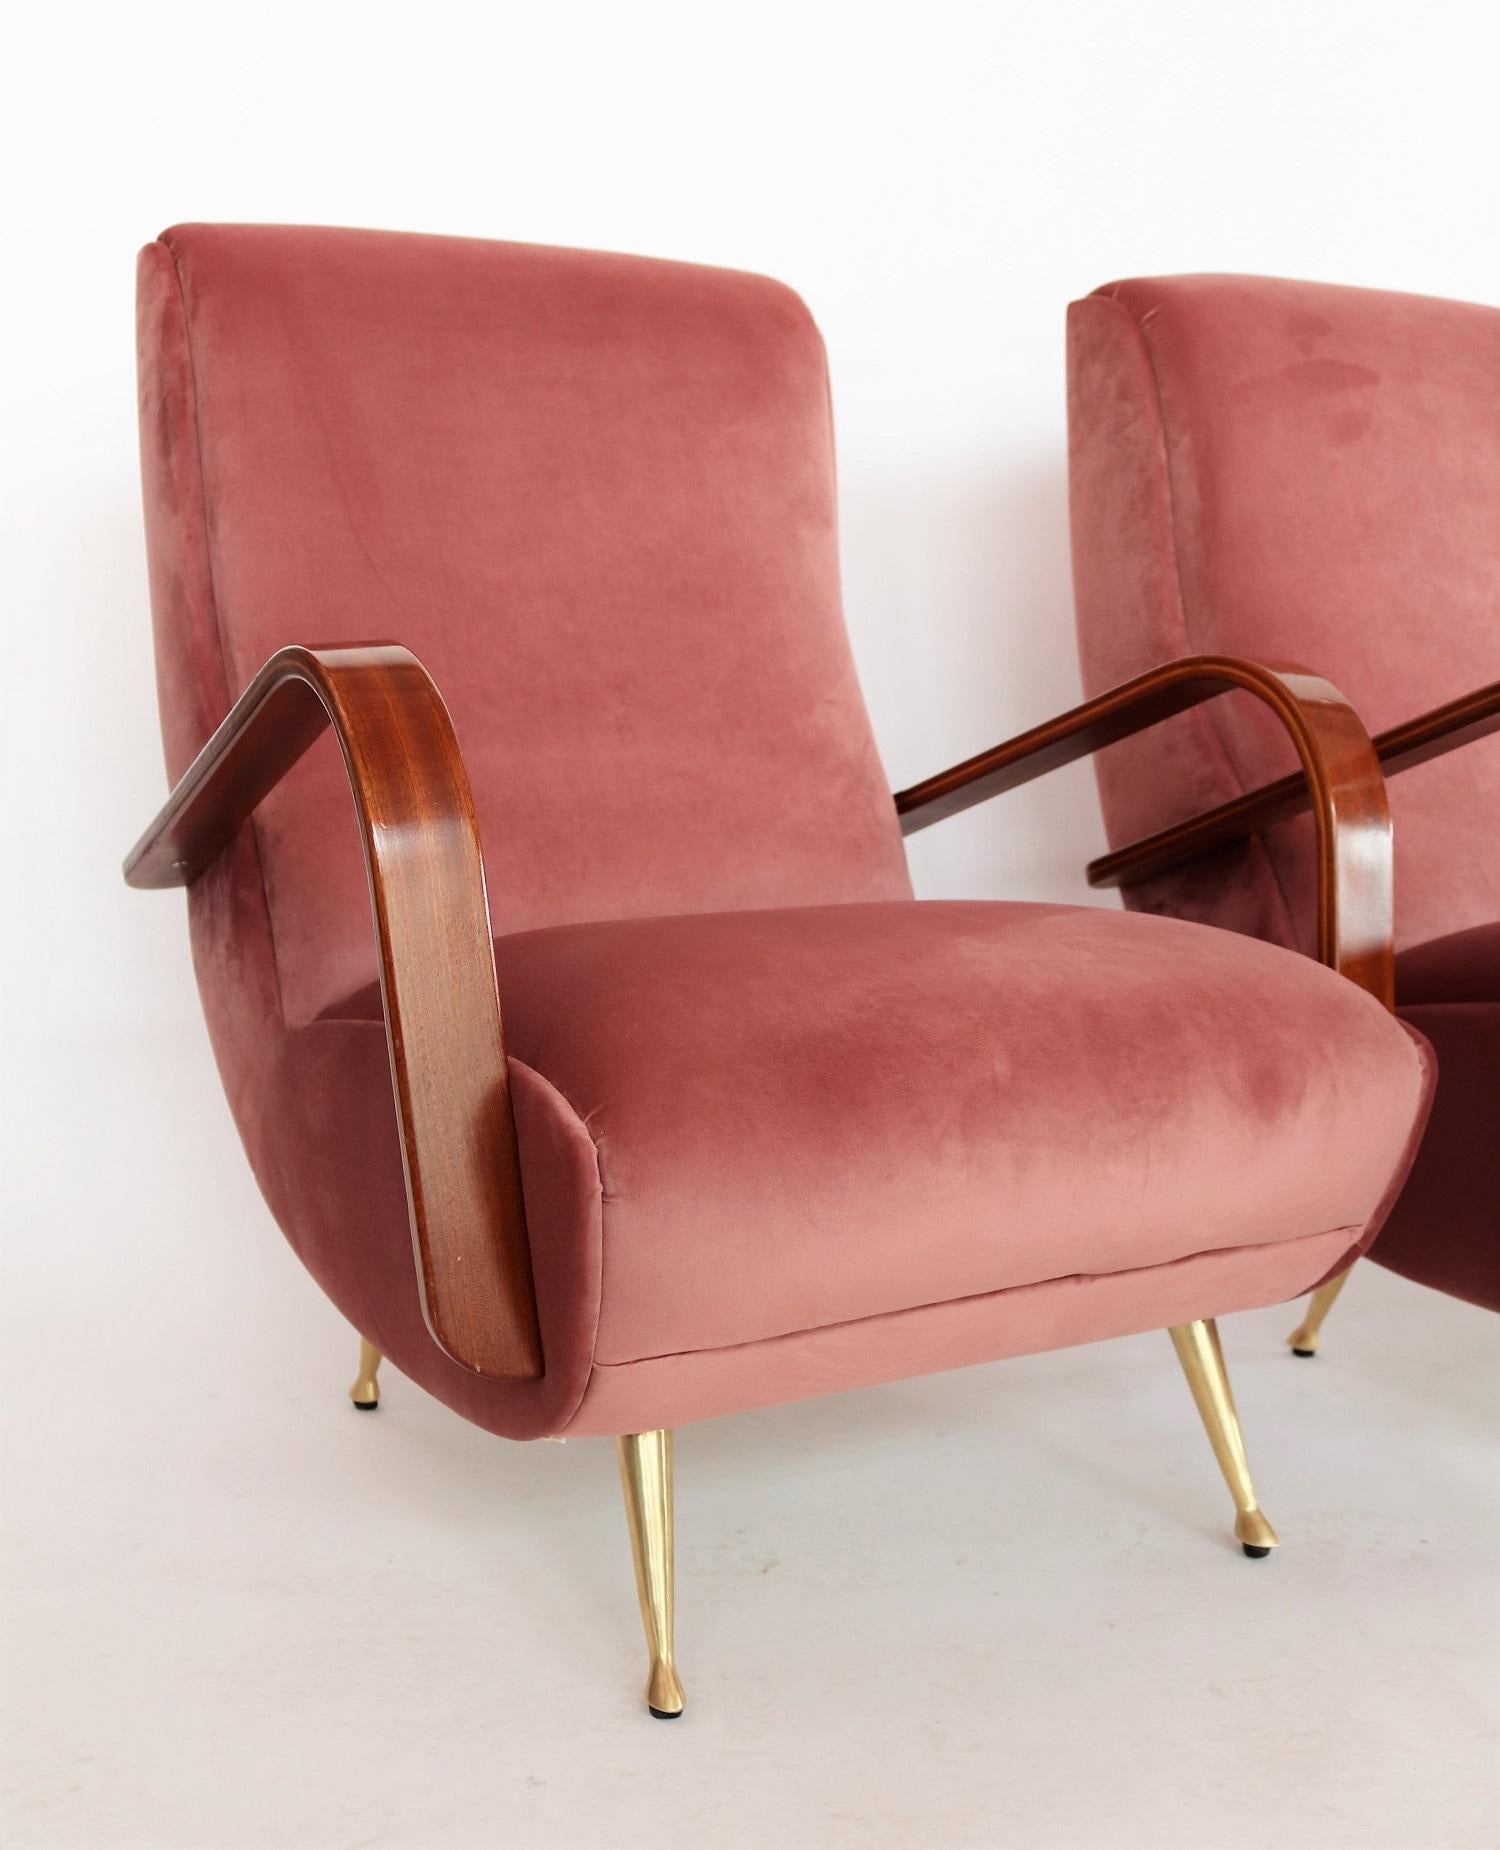 Mid-20th Century Italian Midcentury Armchairs in Mahogany, Brass and Coral Red Velvet, 1950s